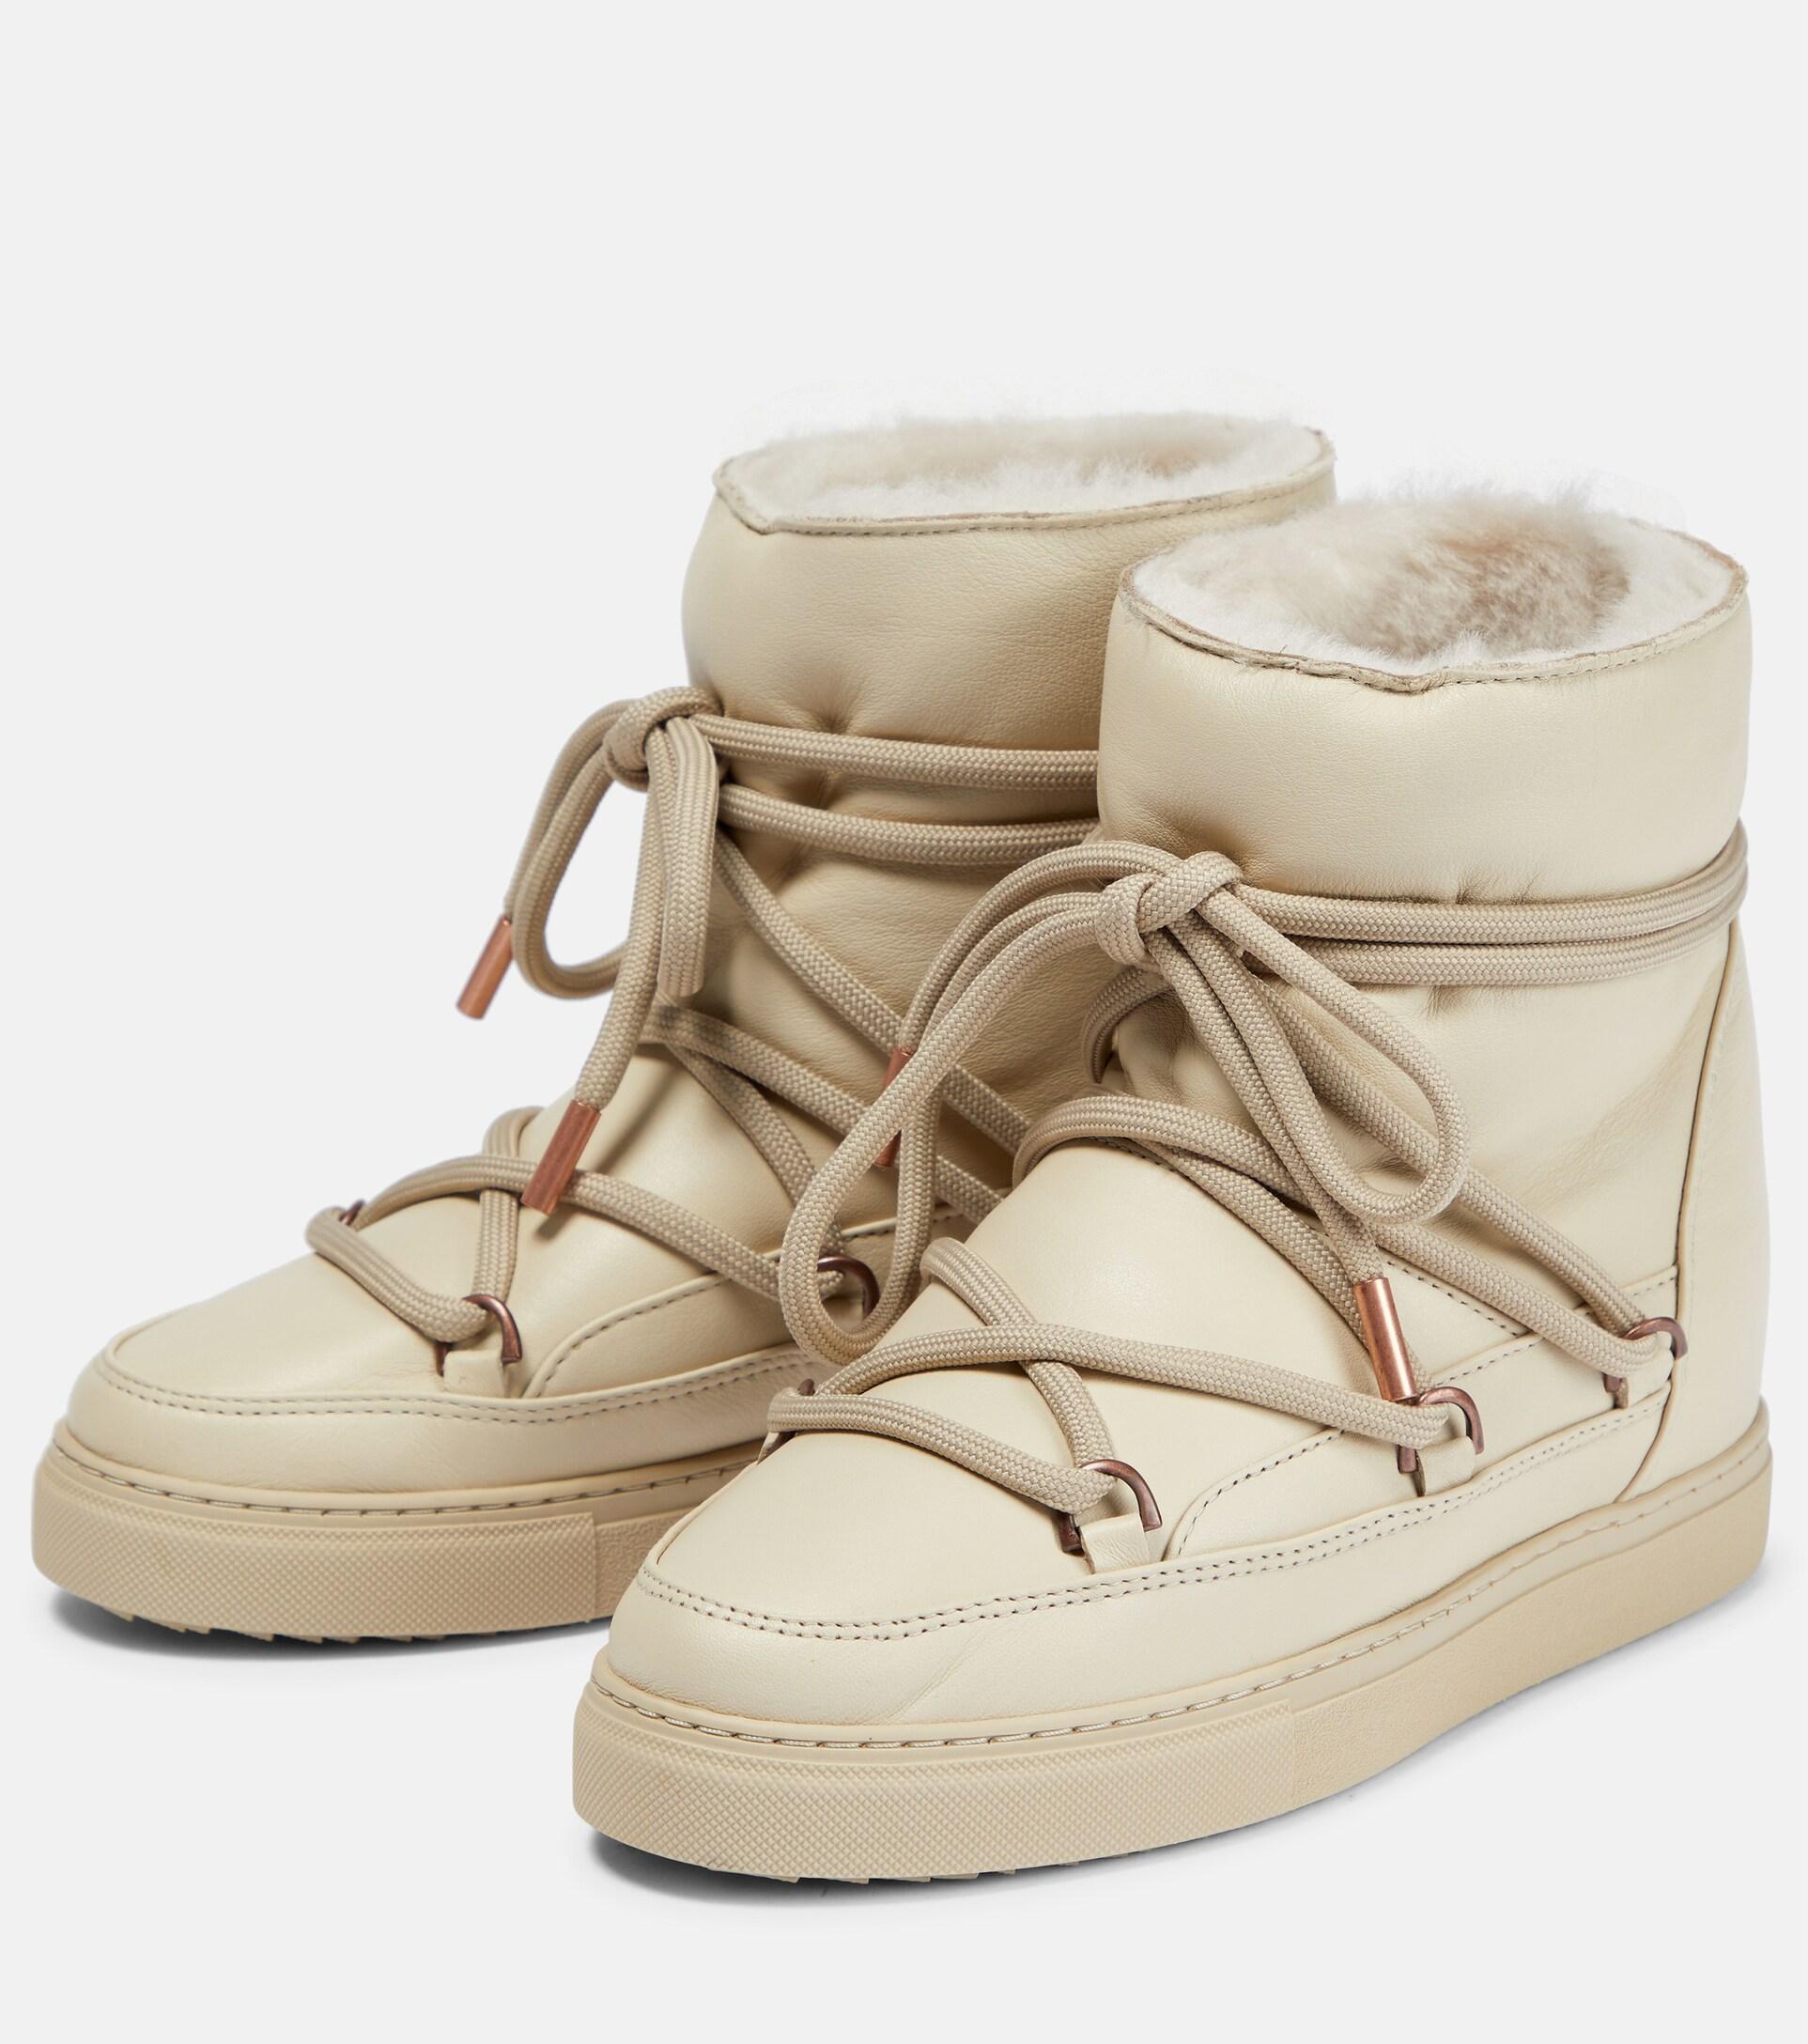 Inuikii Classic Wedge Leather Snow Boots in Natural | Lyst